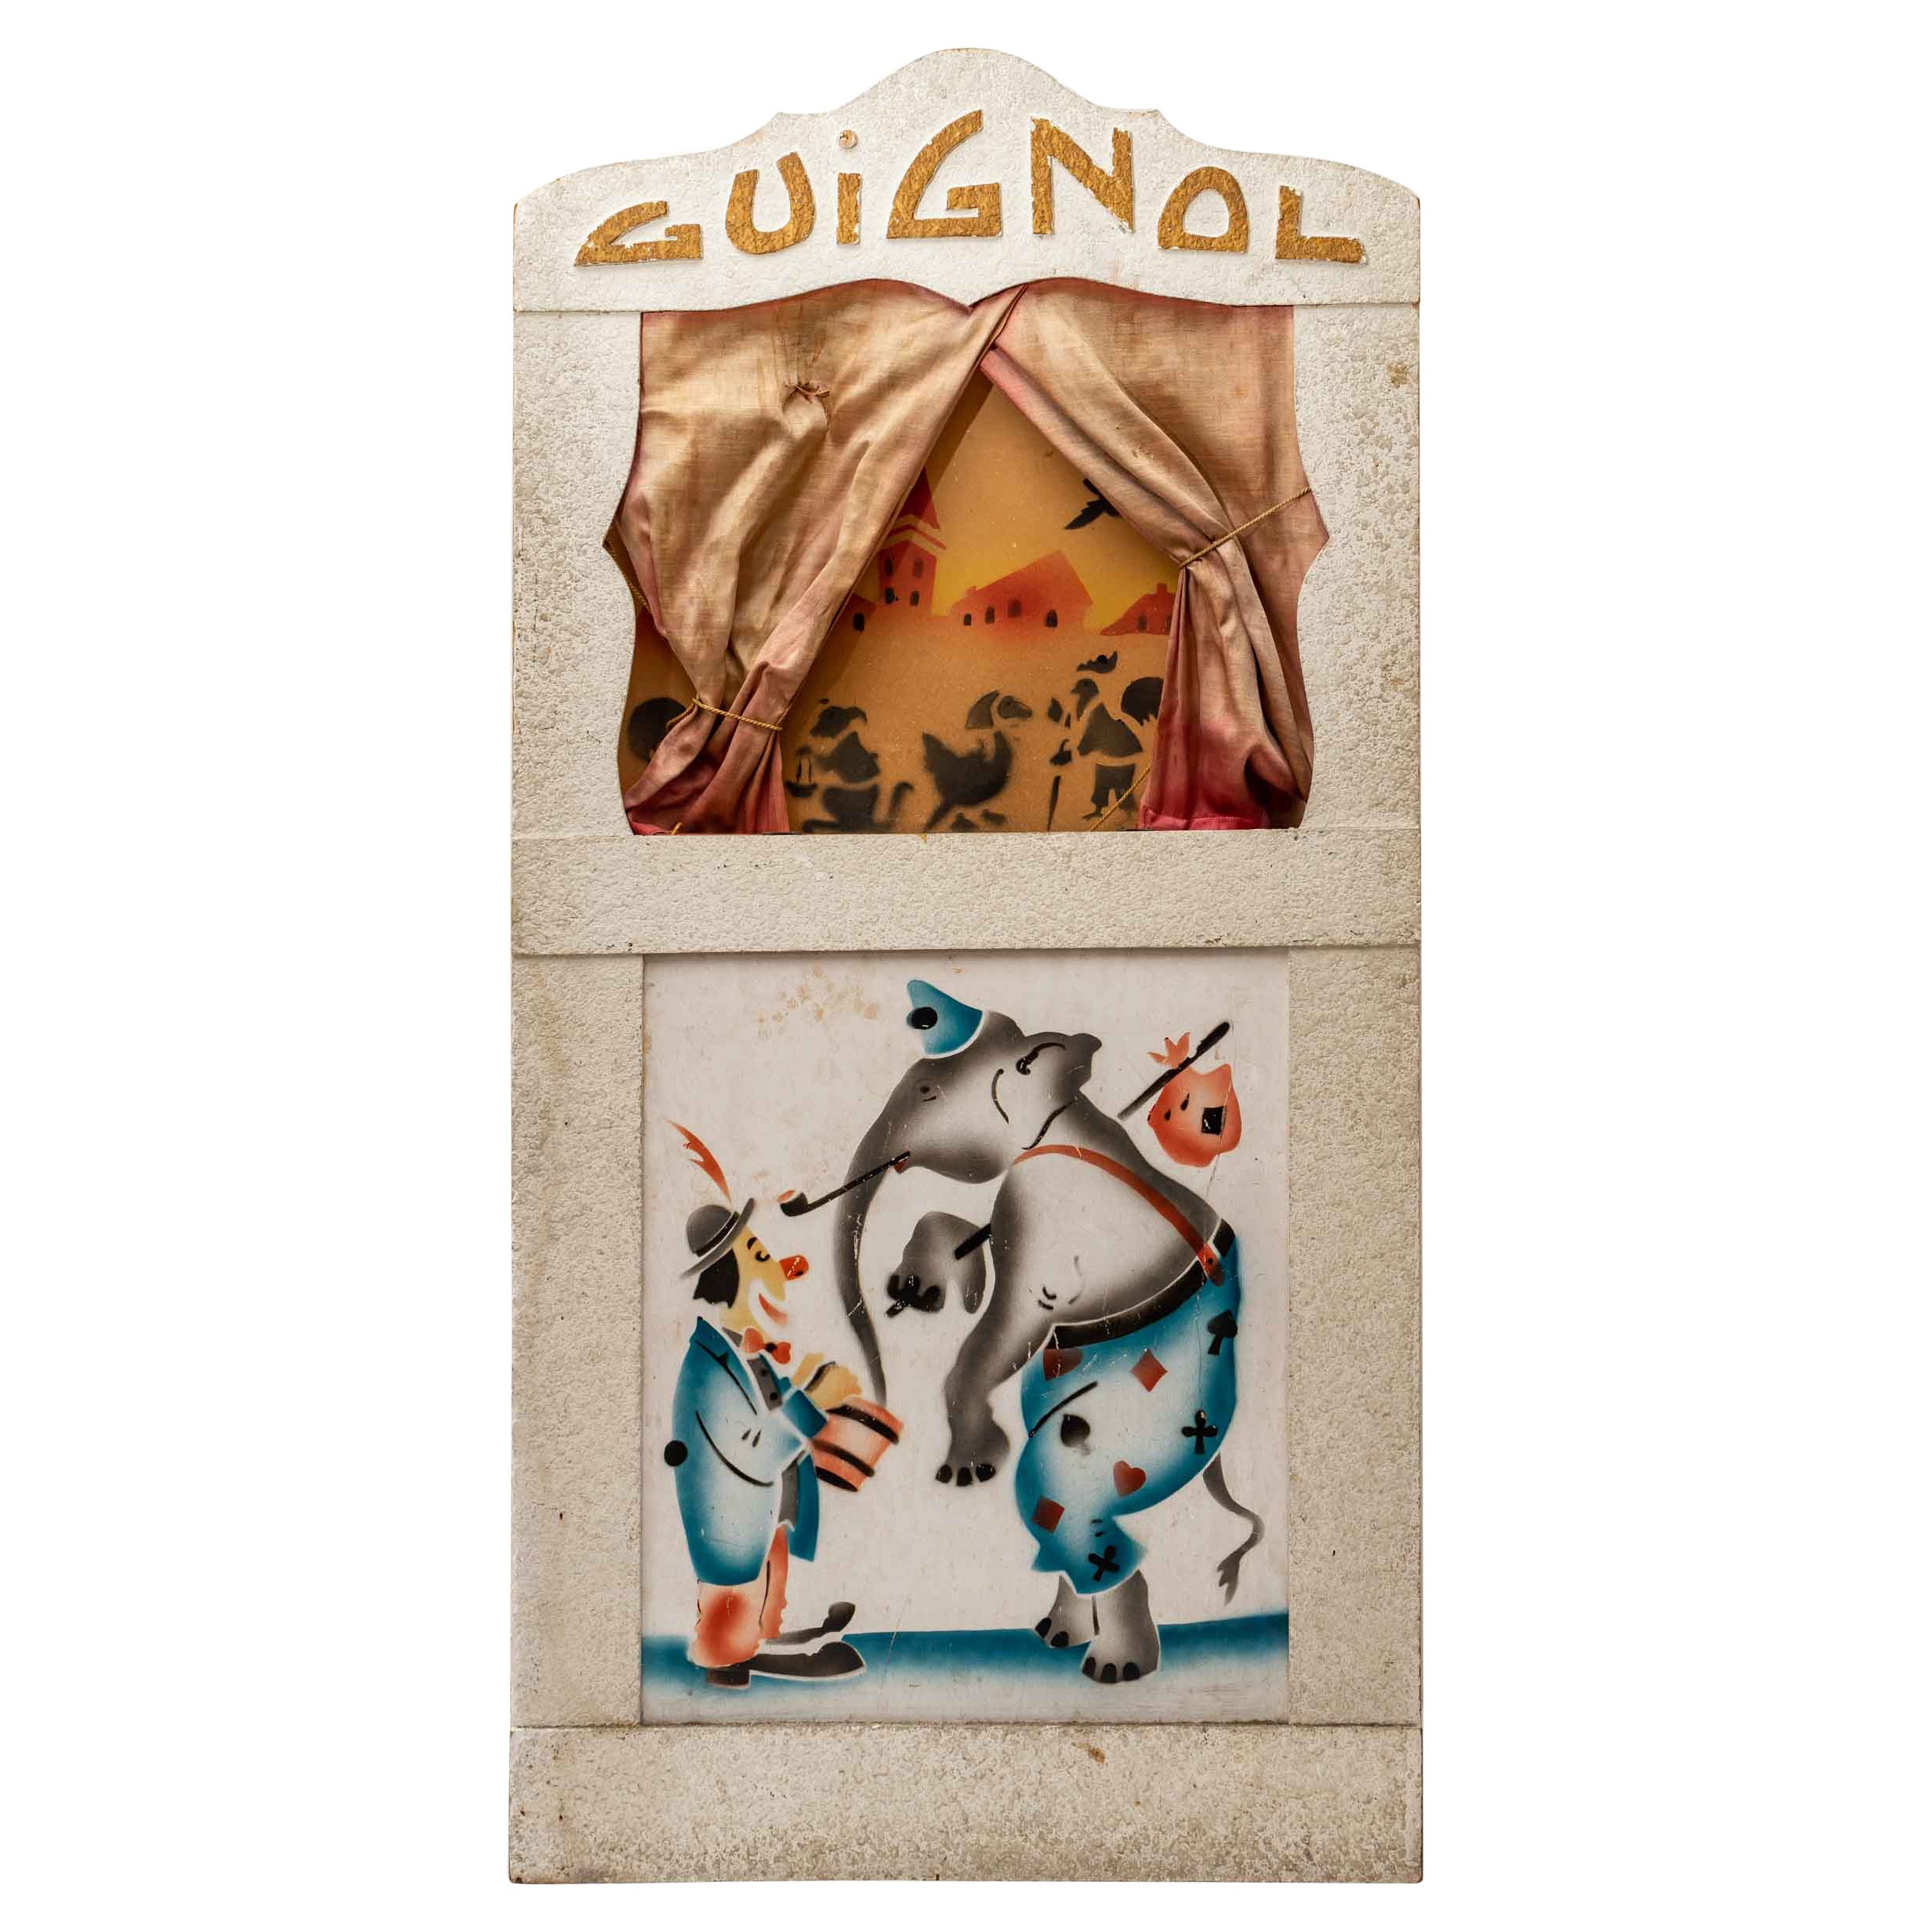 Old Castelet Or Guignol Theater, Period: Early 20th Century